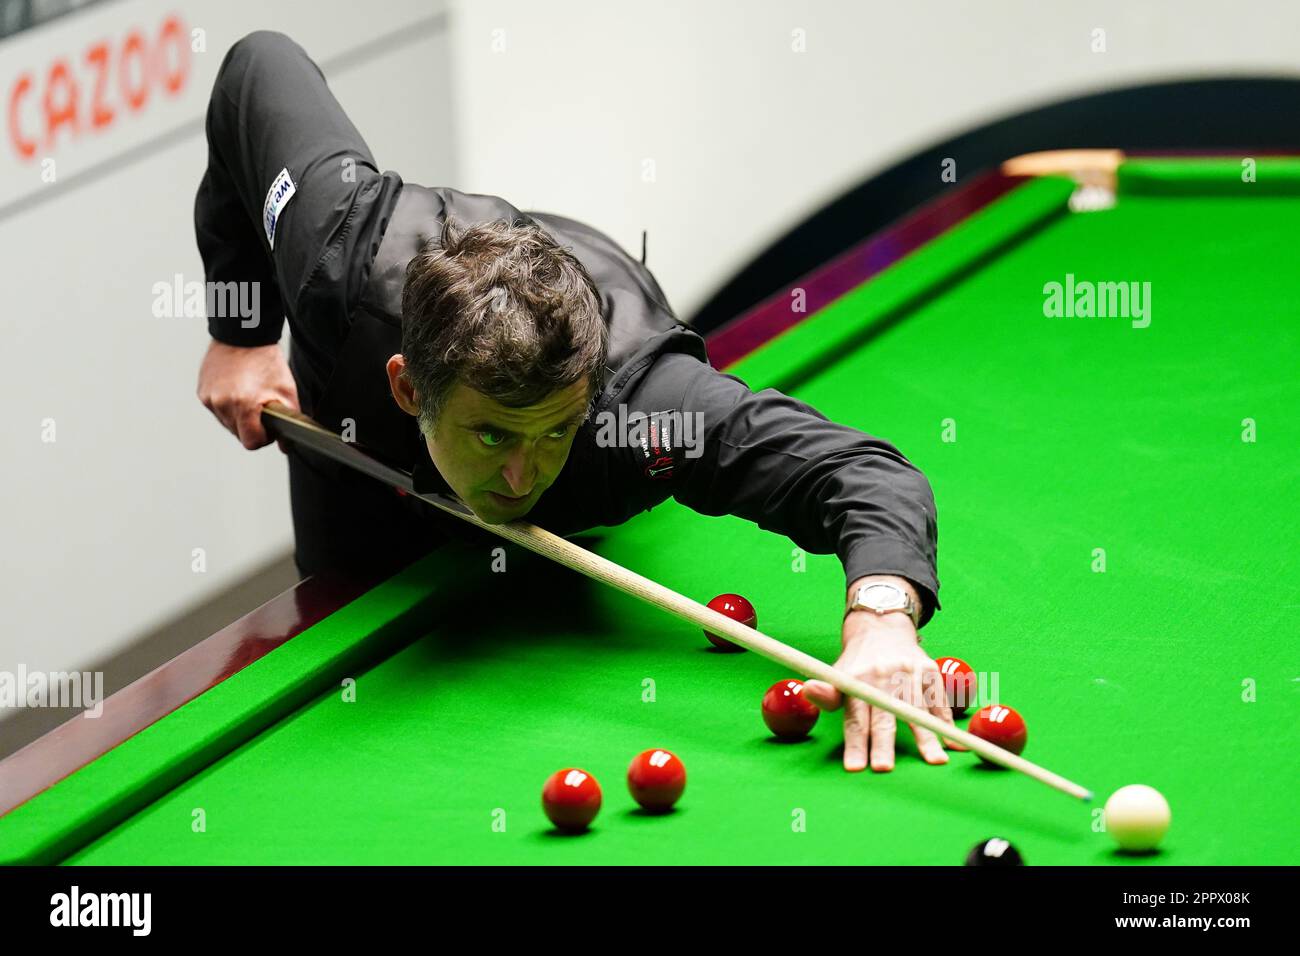 Ronnie OSullivan in action against Luca Brecel (not pictured) on day eleven of the Cazoo World Snooker Championship at the Crucible Theatre, Sheffield